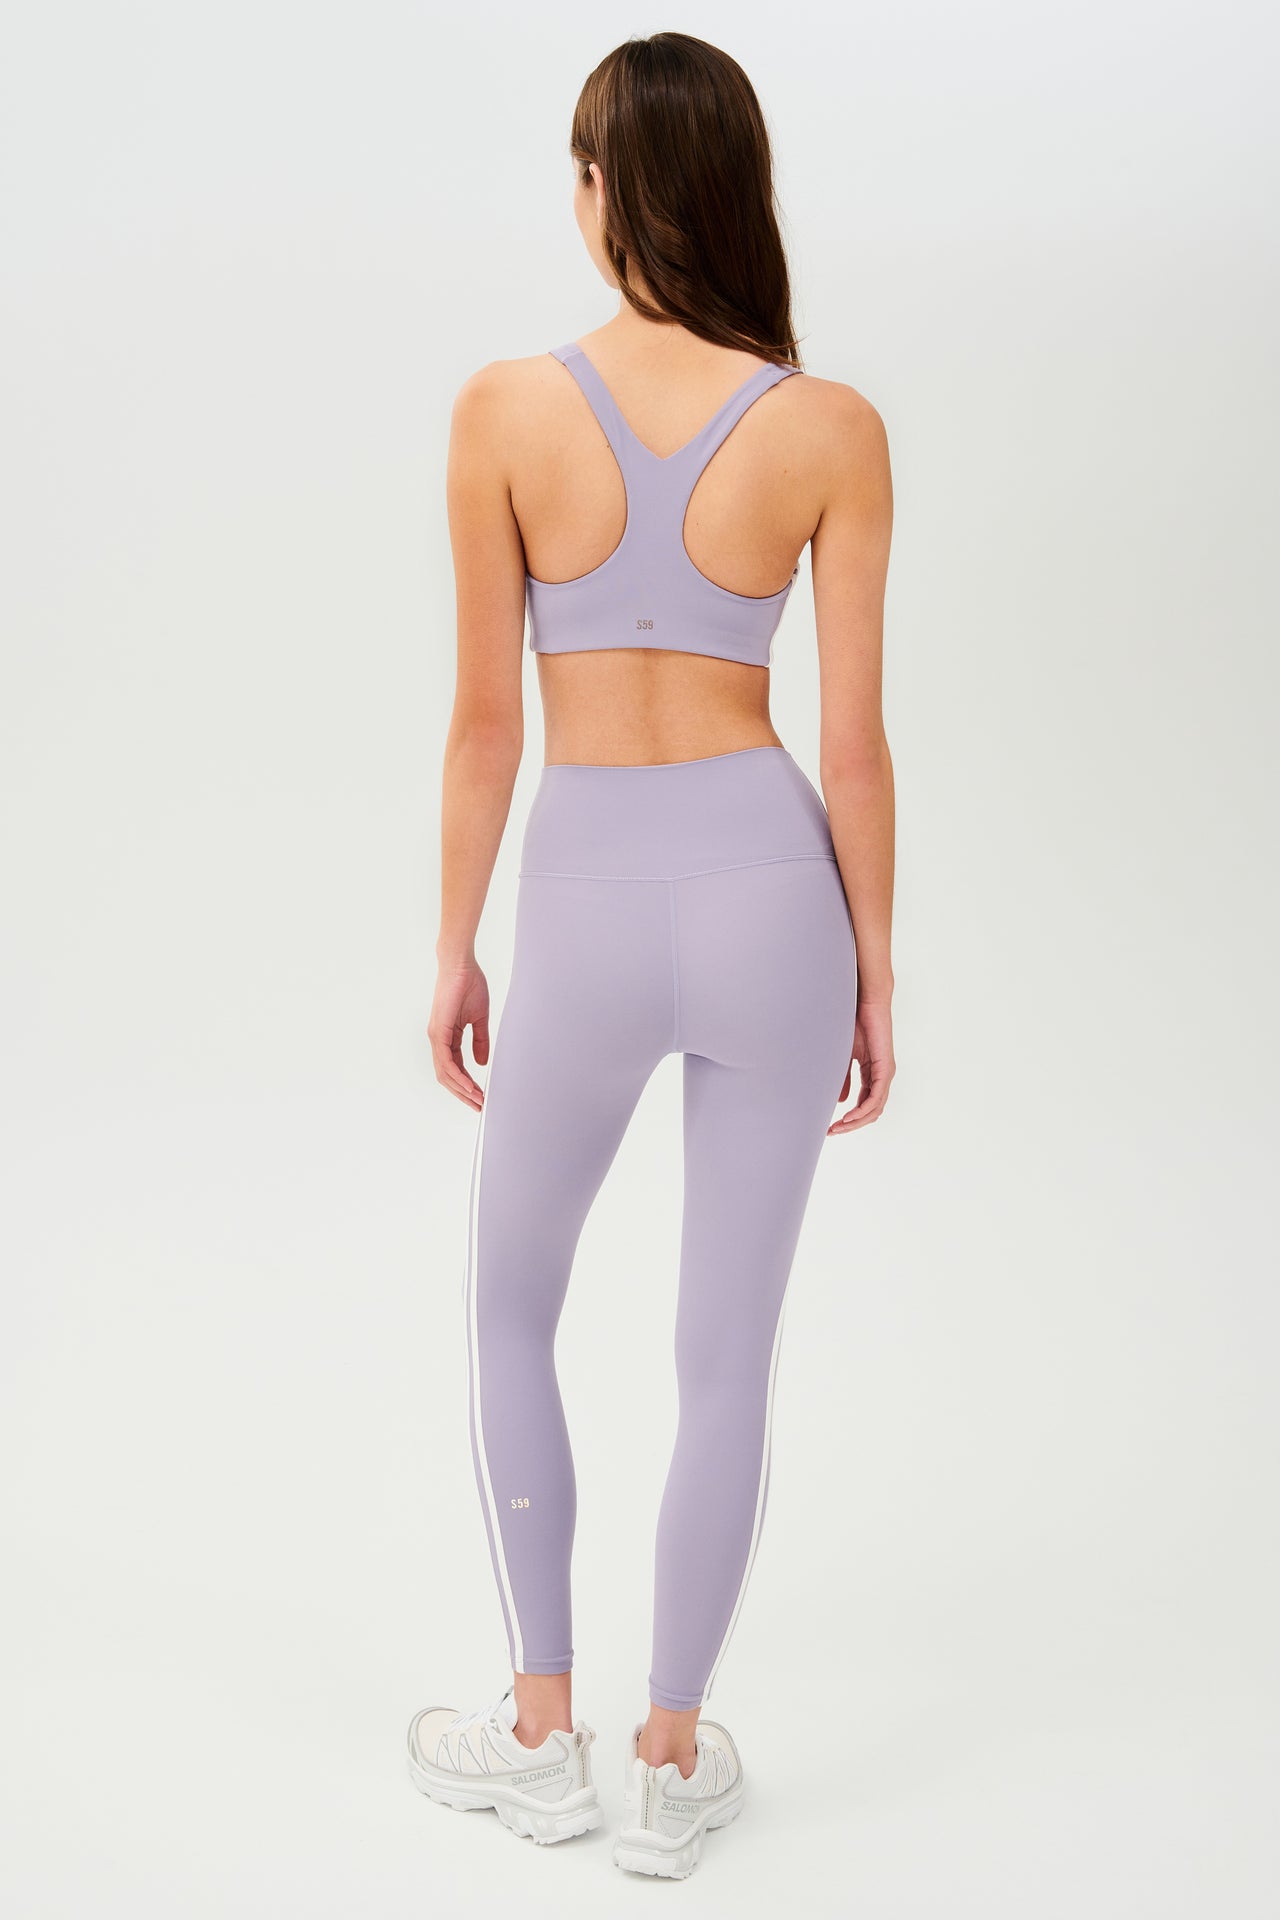 Full back view of girl wearing light purple sports bra with two thin white stripes down the side and light purple leggings with white shoes